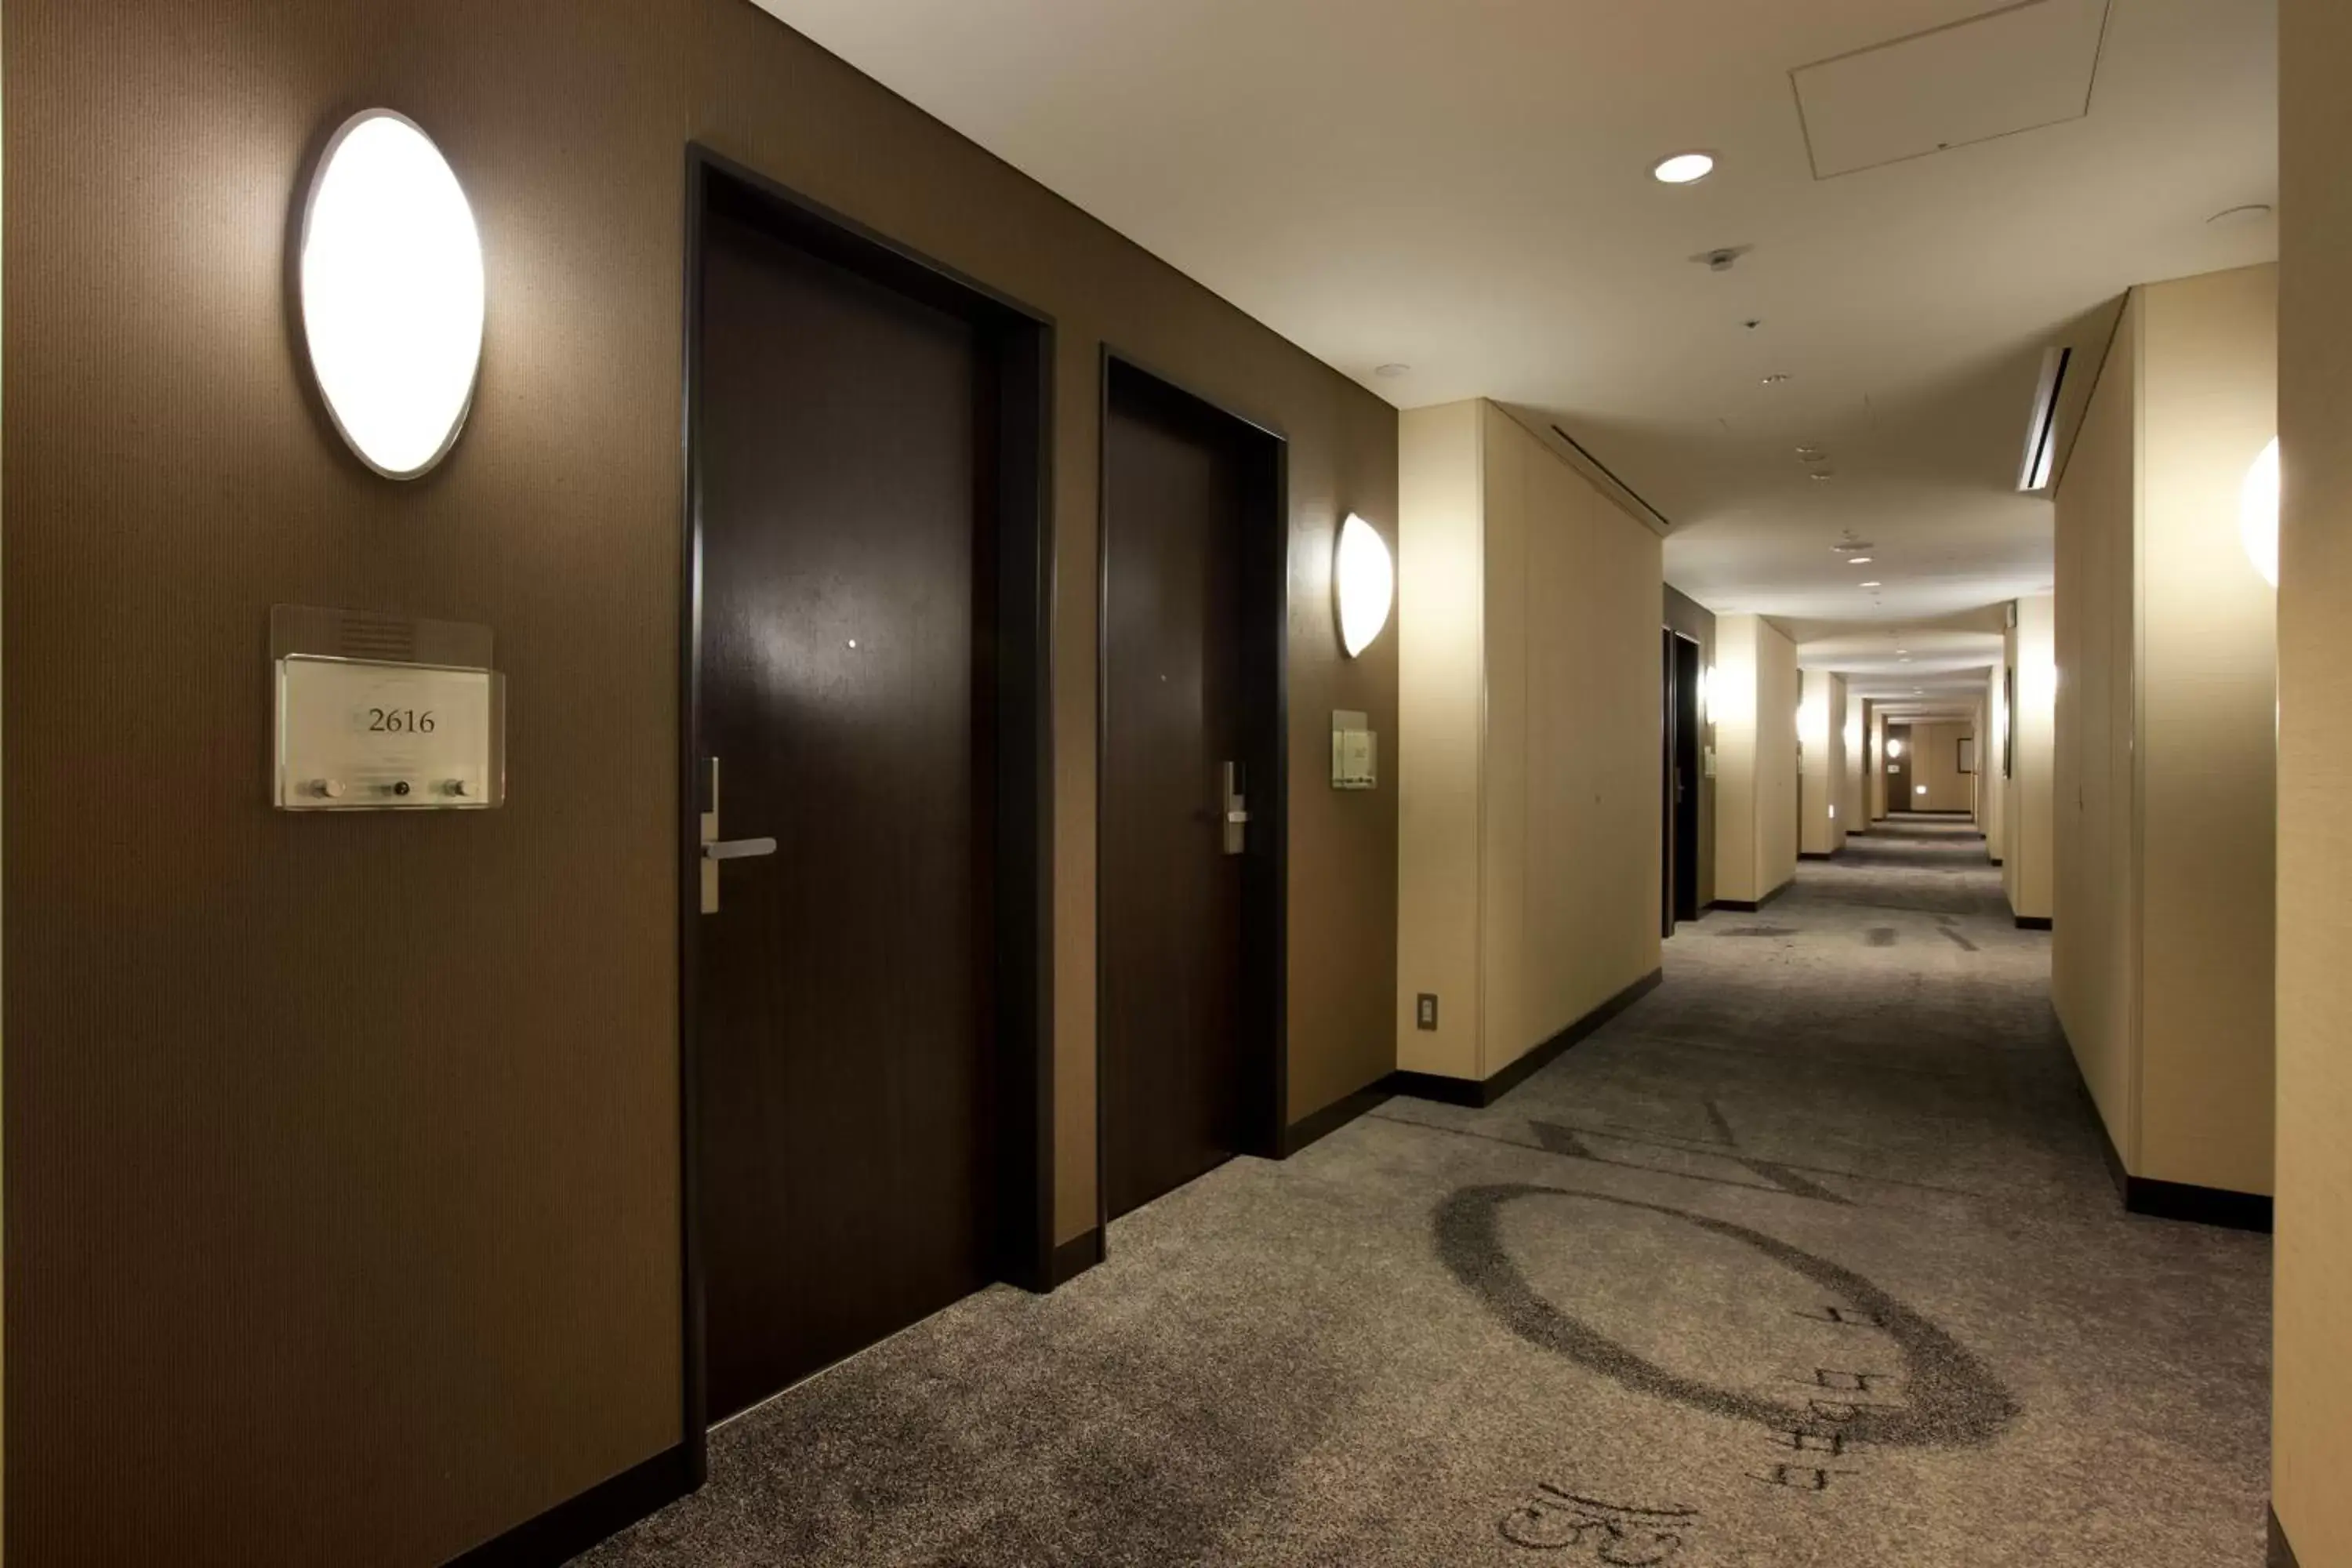 Area and facilities in Royal Park Hotel The Shiodome, Tokyo